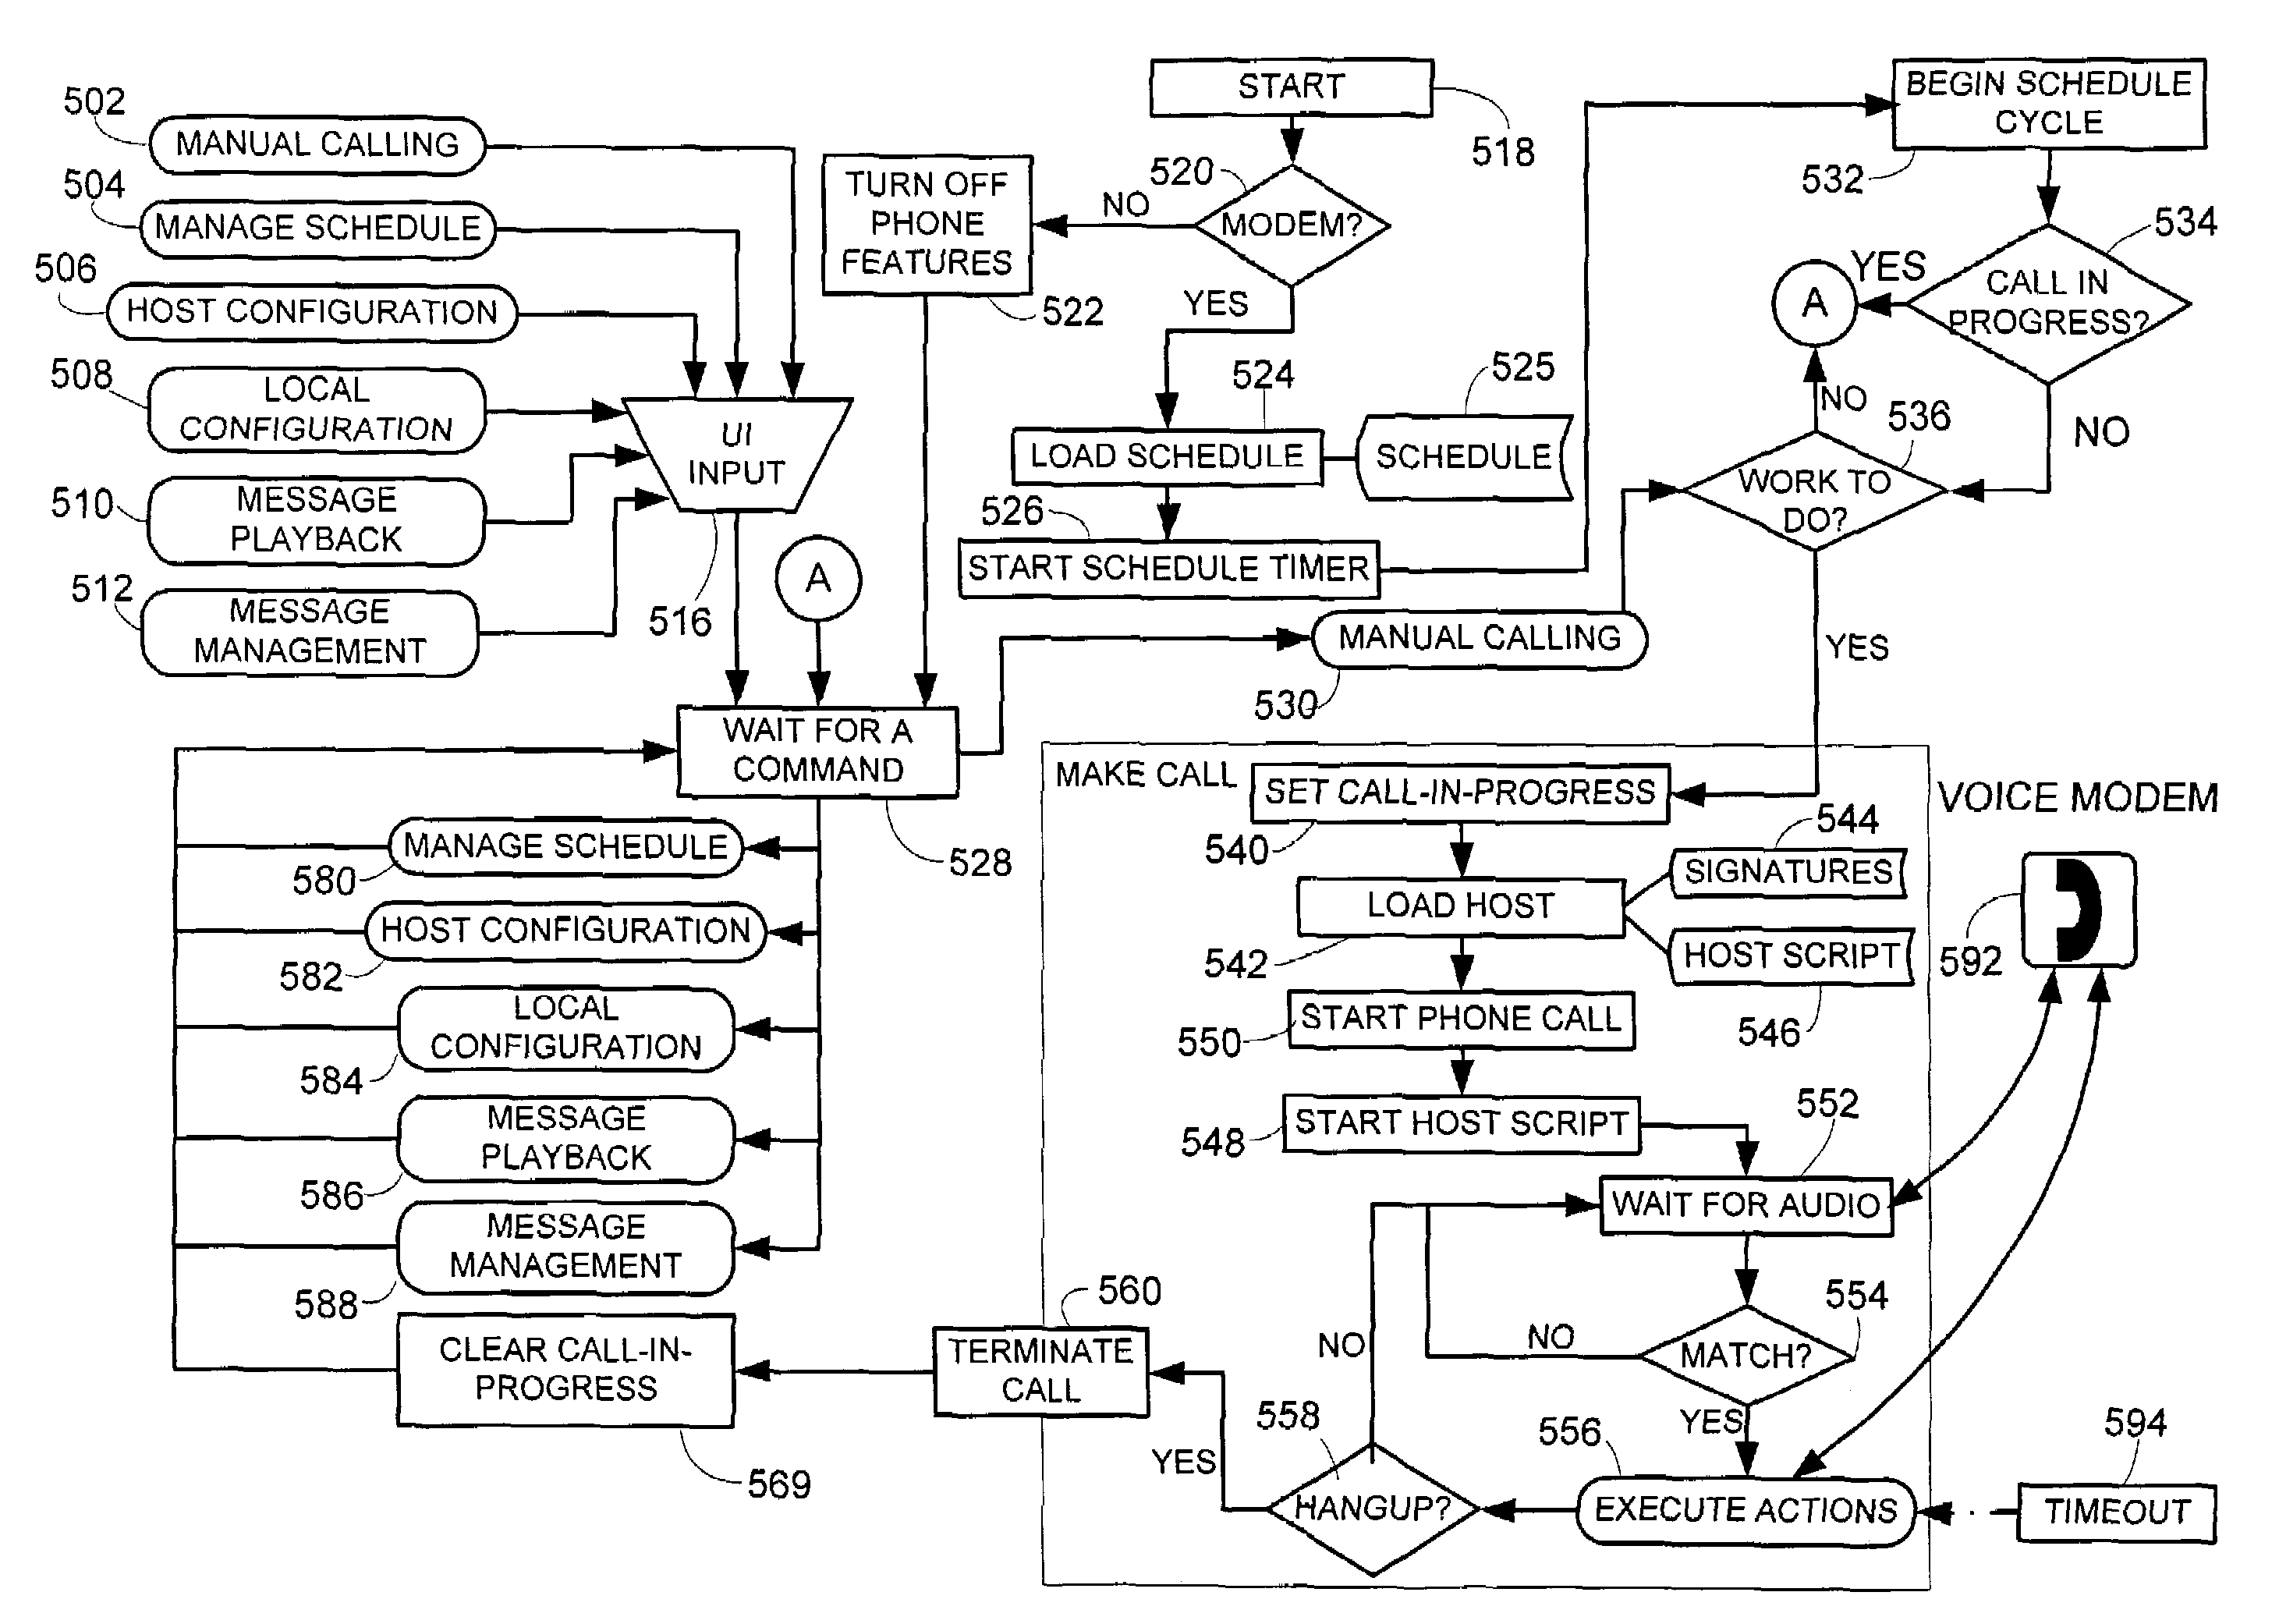 Closed-loop command and response system for automatic communications between interacting computer systems over an audio communications channel